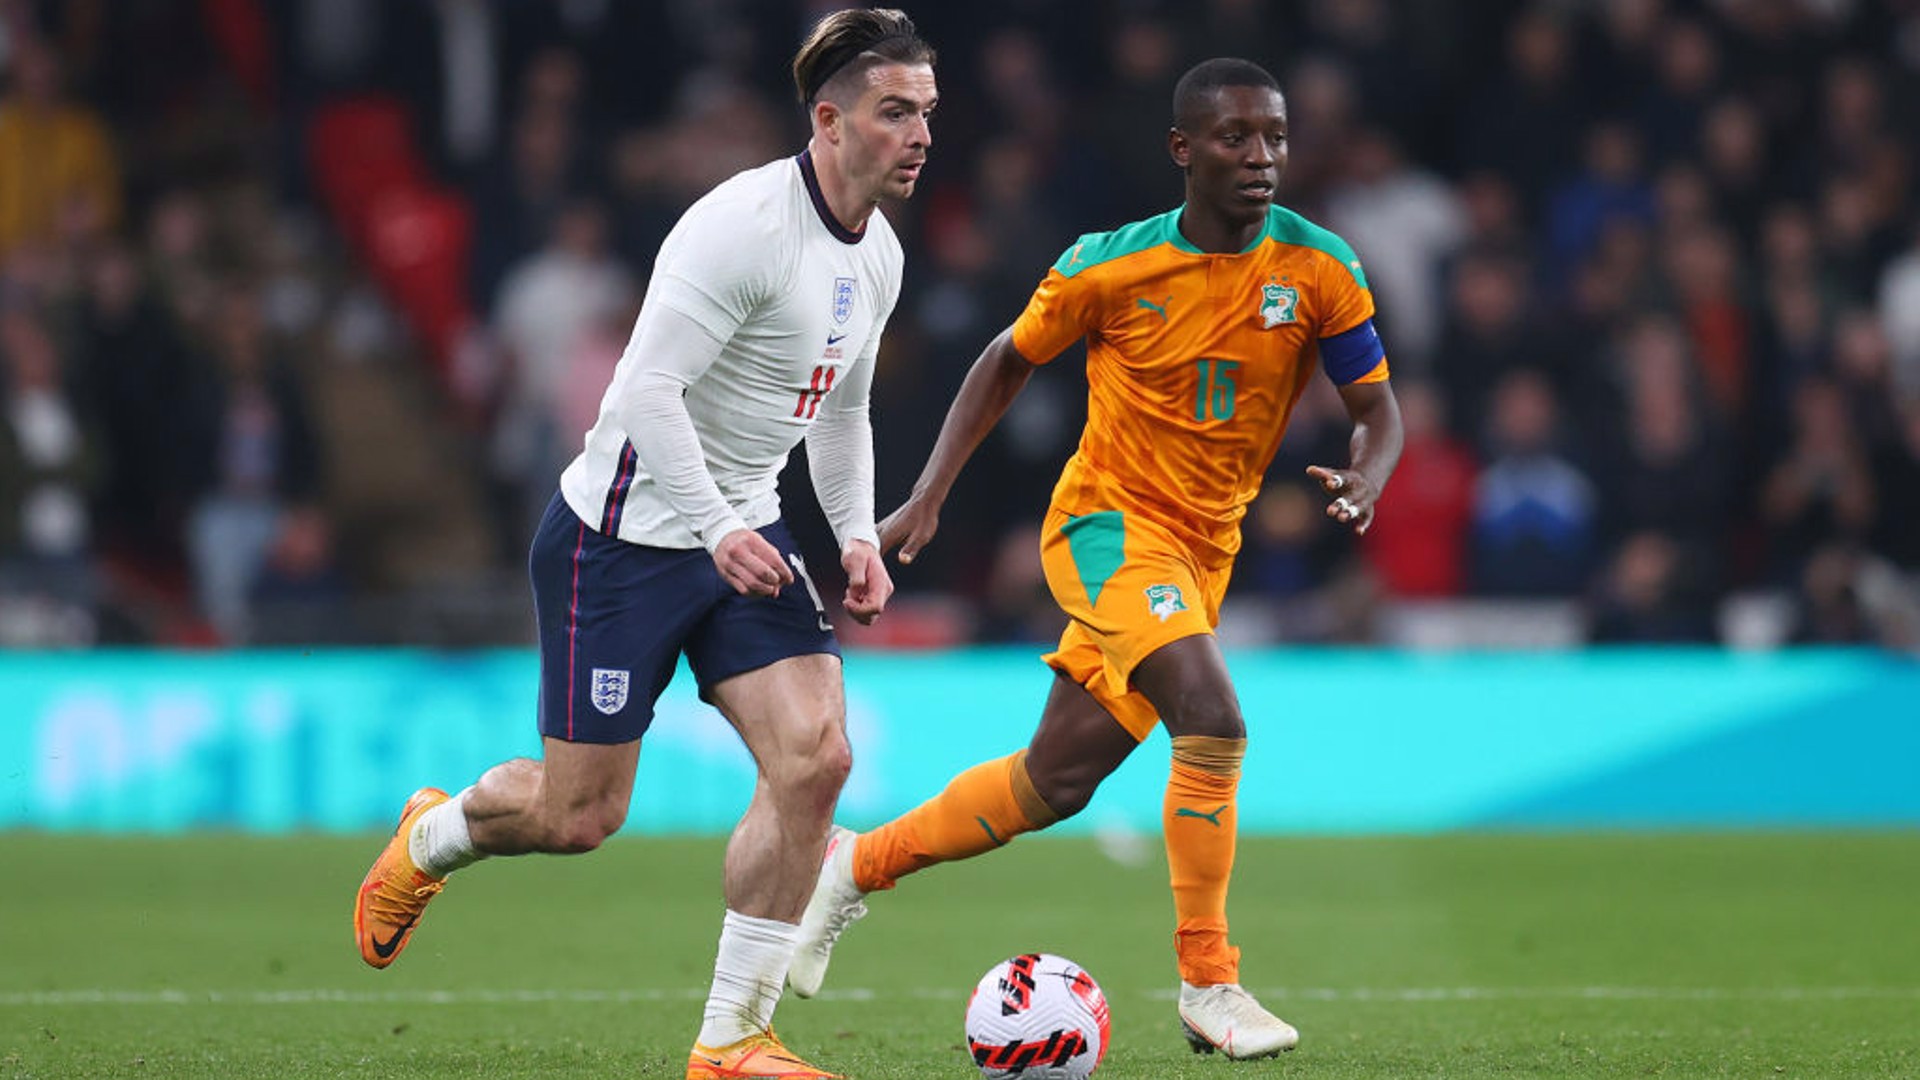 Grealish assisted Sterling's goal in the 3-0 win over Ivory Coast.                